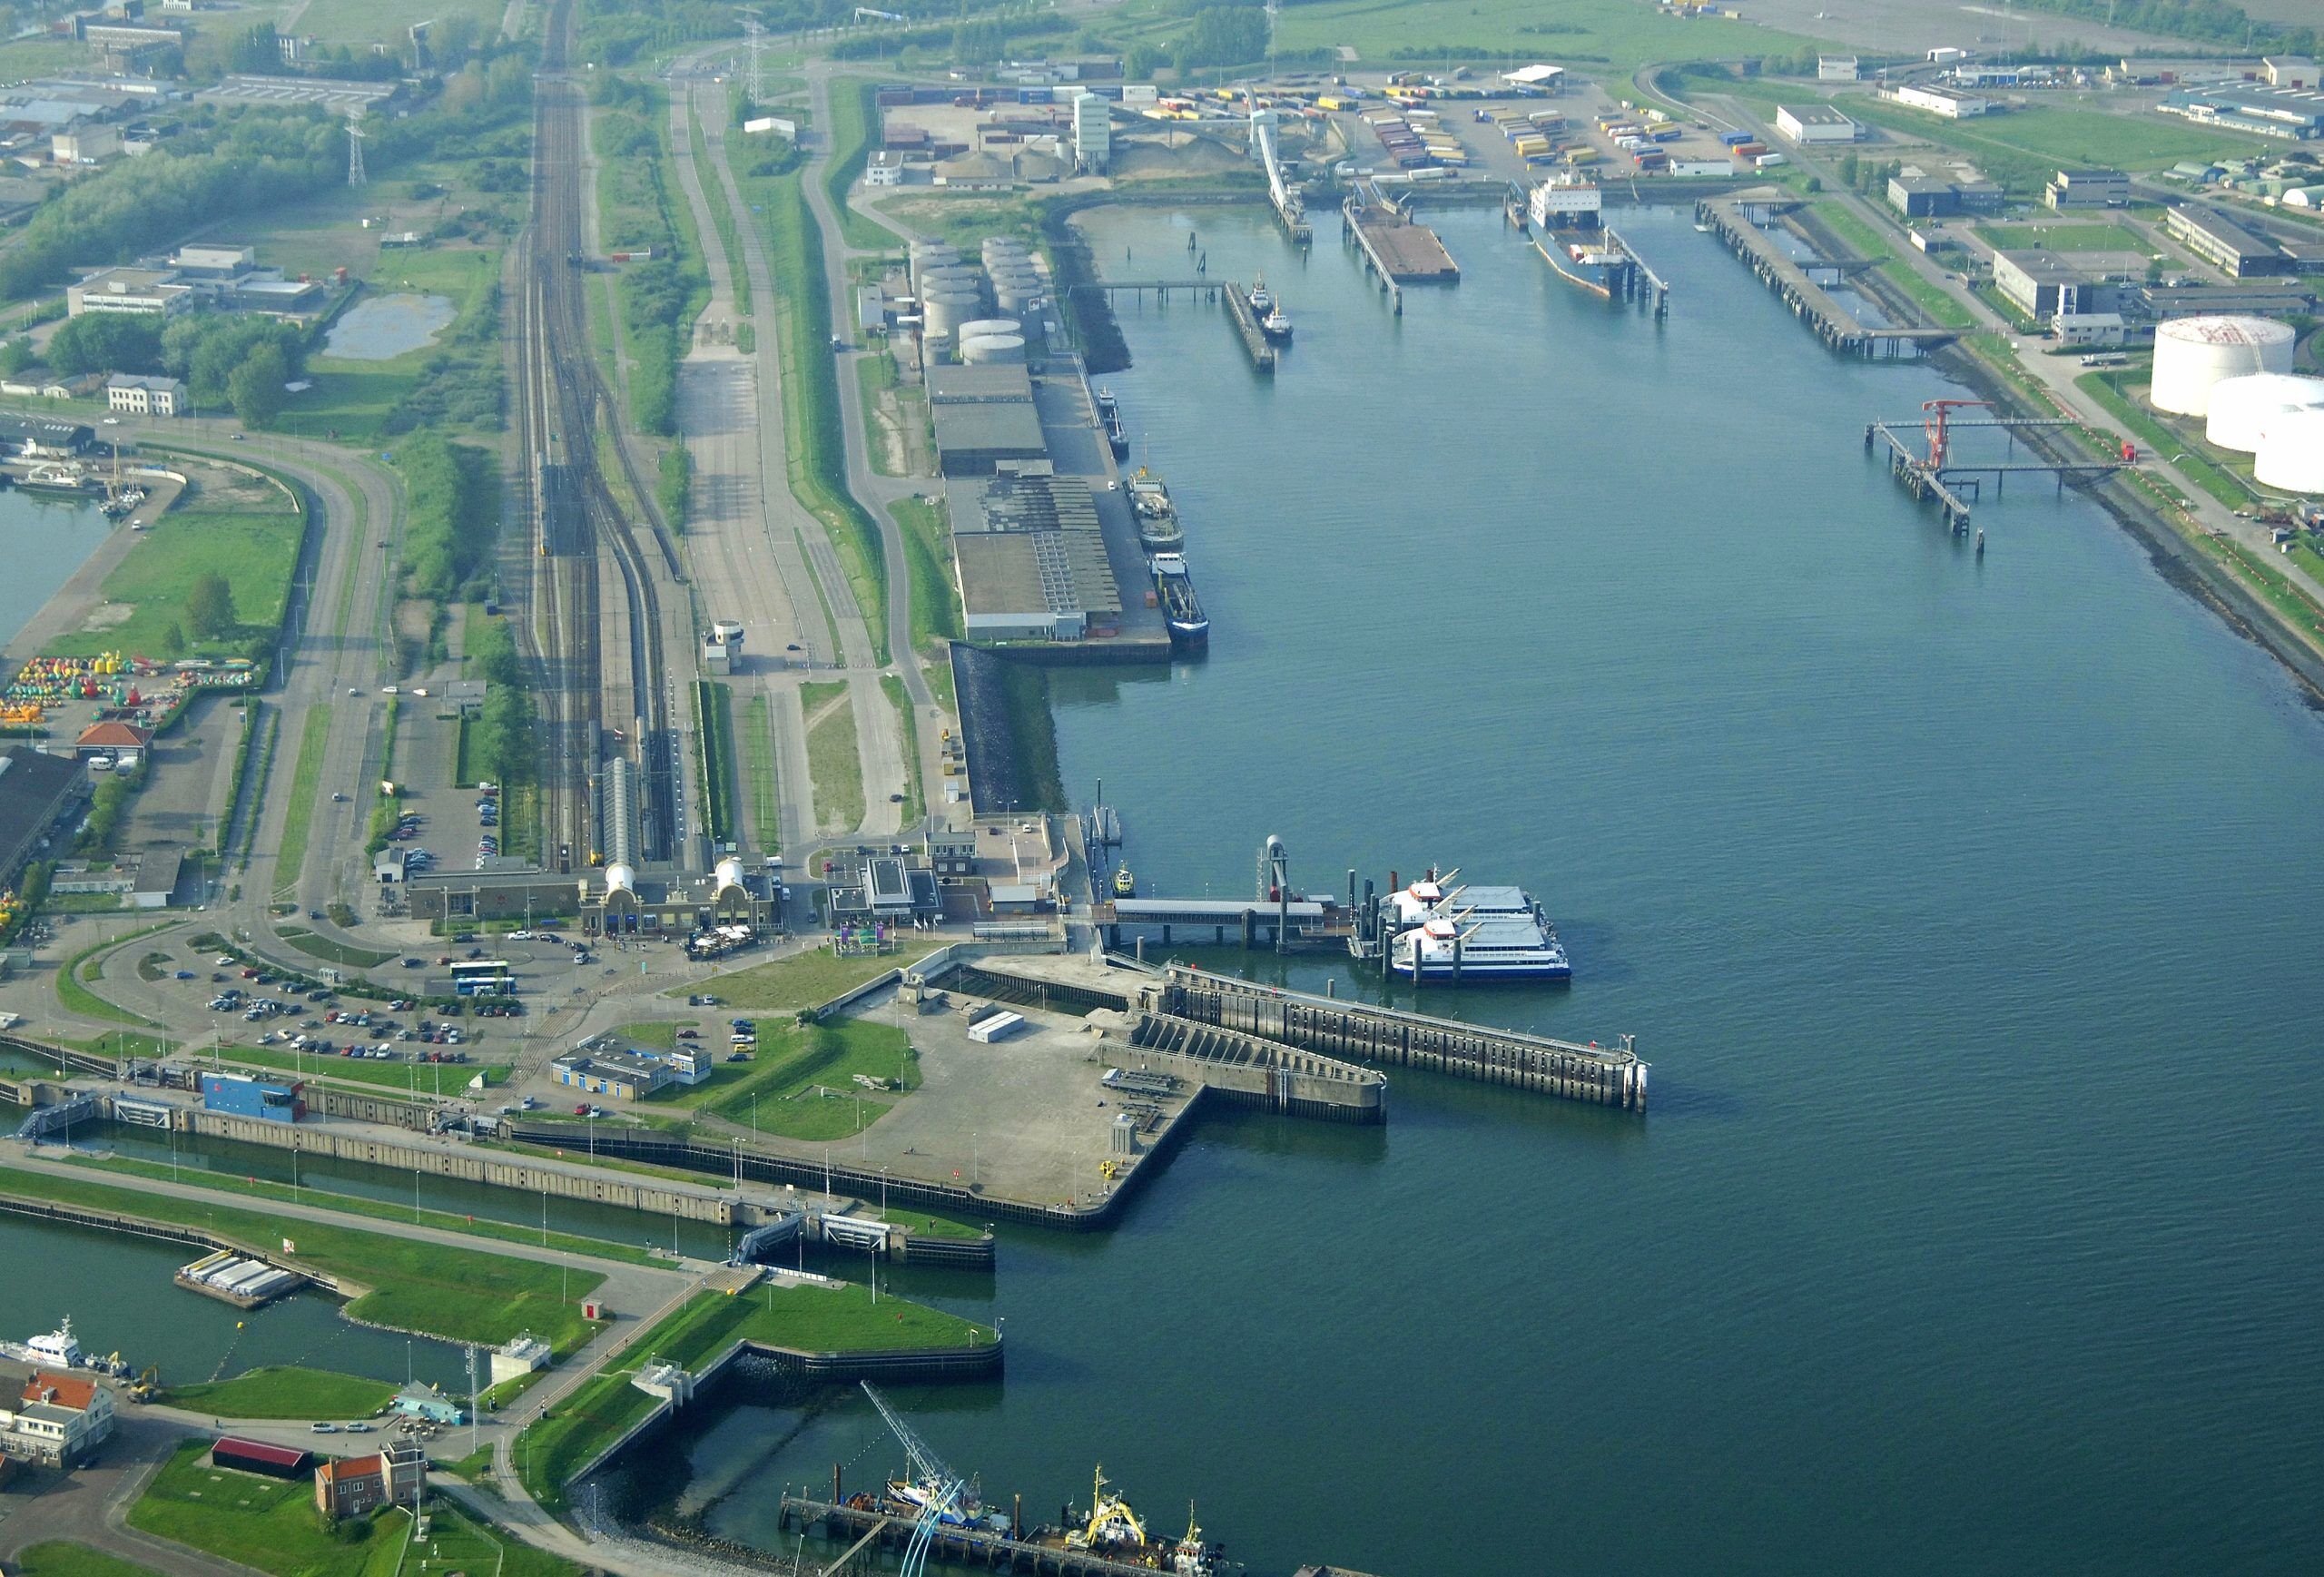 An aerial view of Vlissingen Harbour and the entrance to the inland waterways.